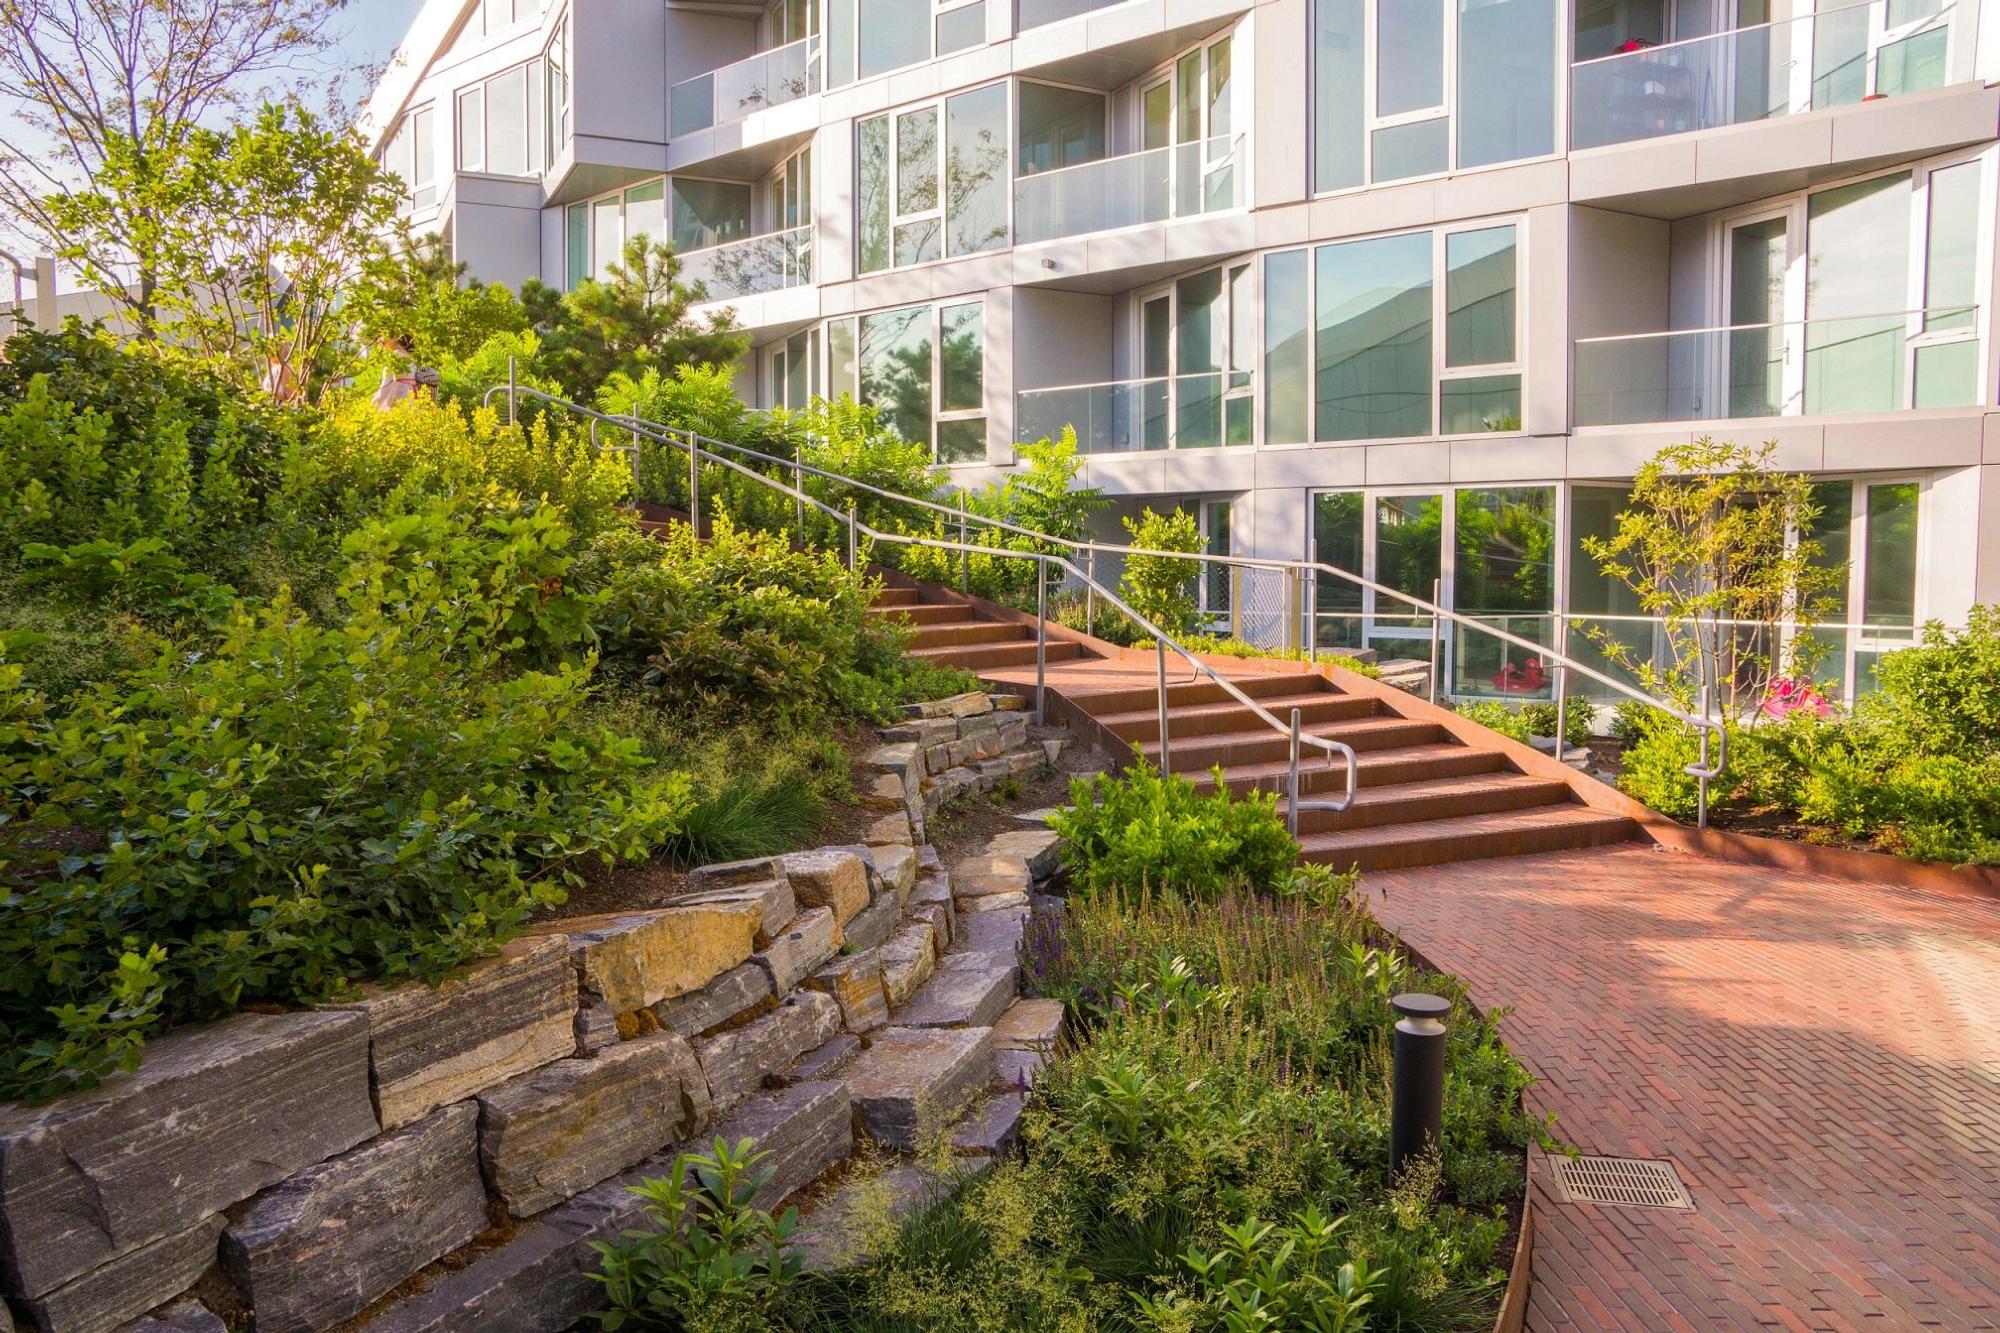 An image of the outdoor brick paving, walkways, walls, ornamental plants and building at VIA 57 West